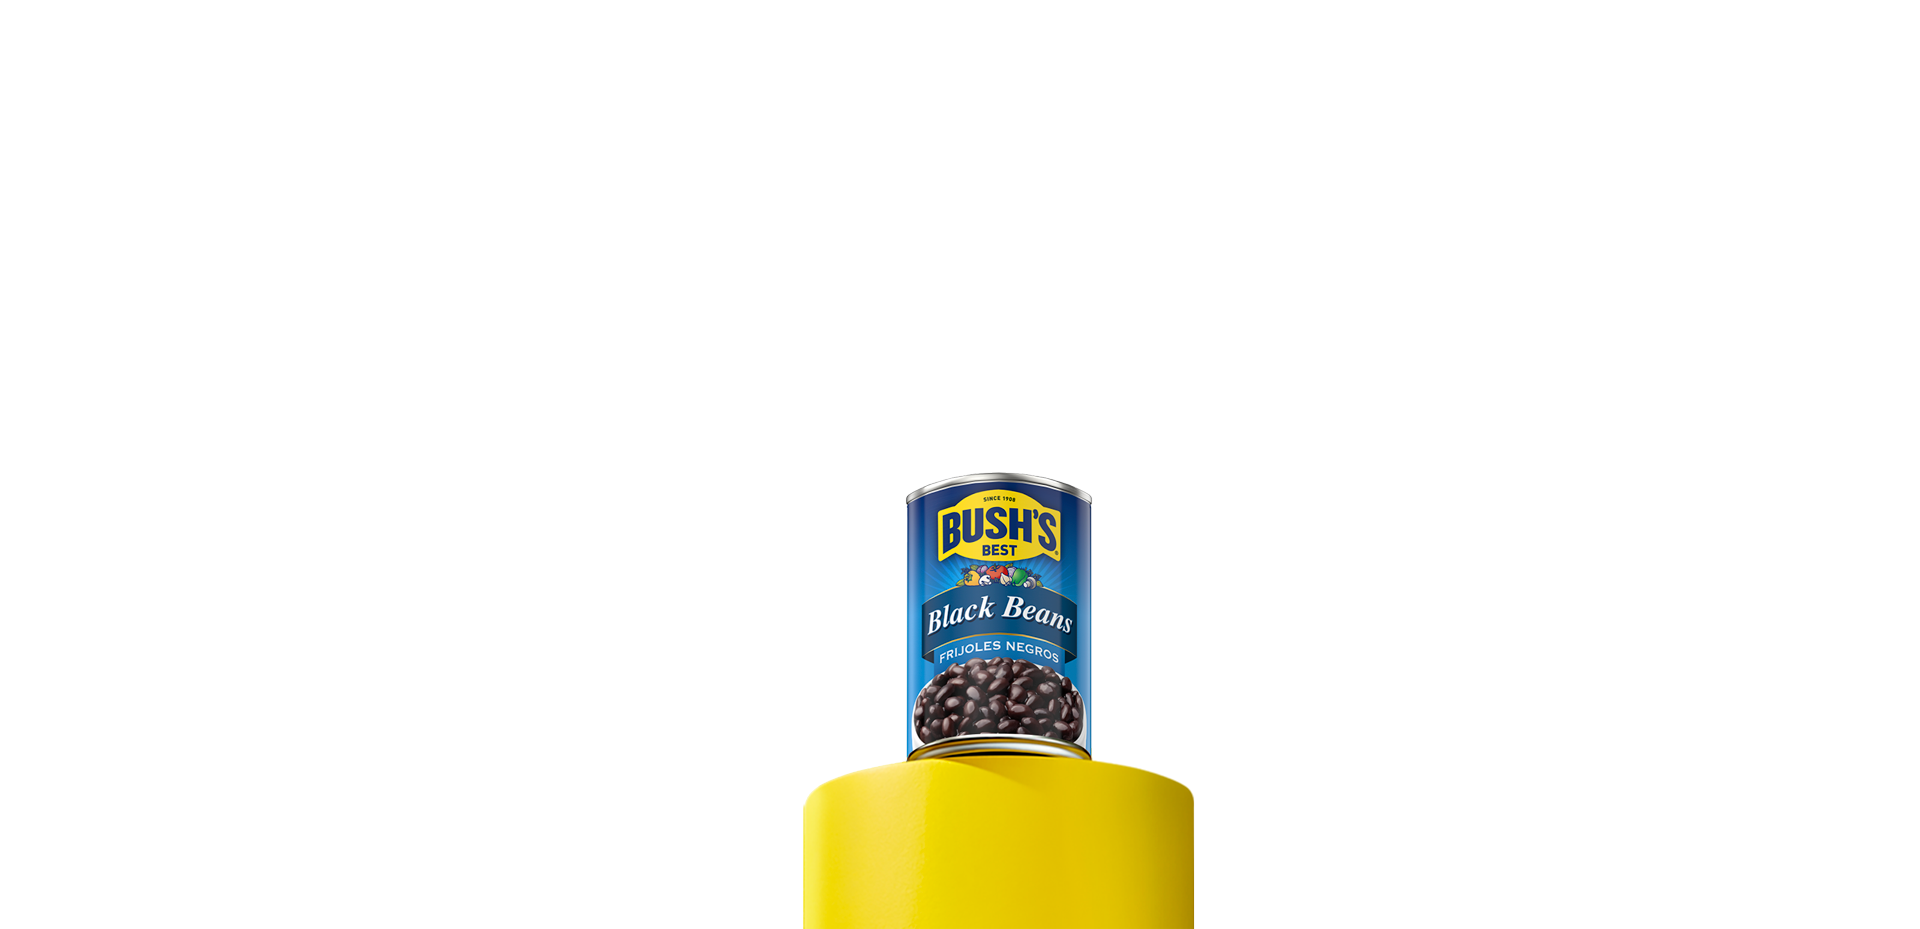 Can of black beans on yellow pedestal